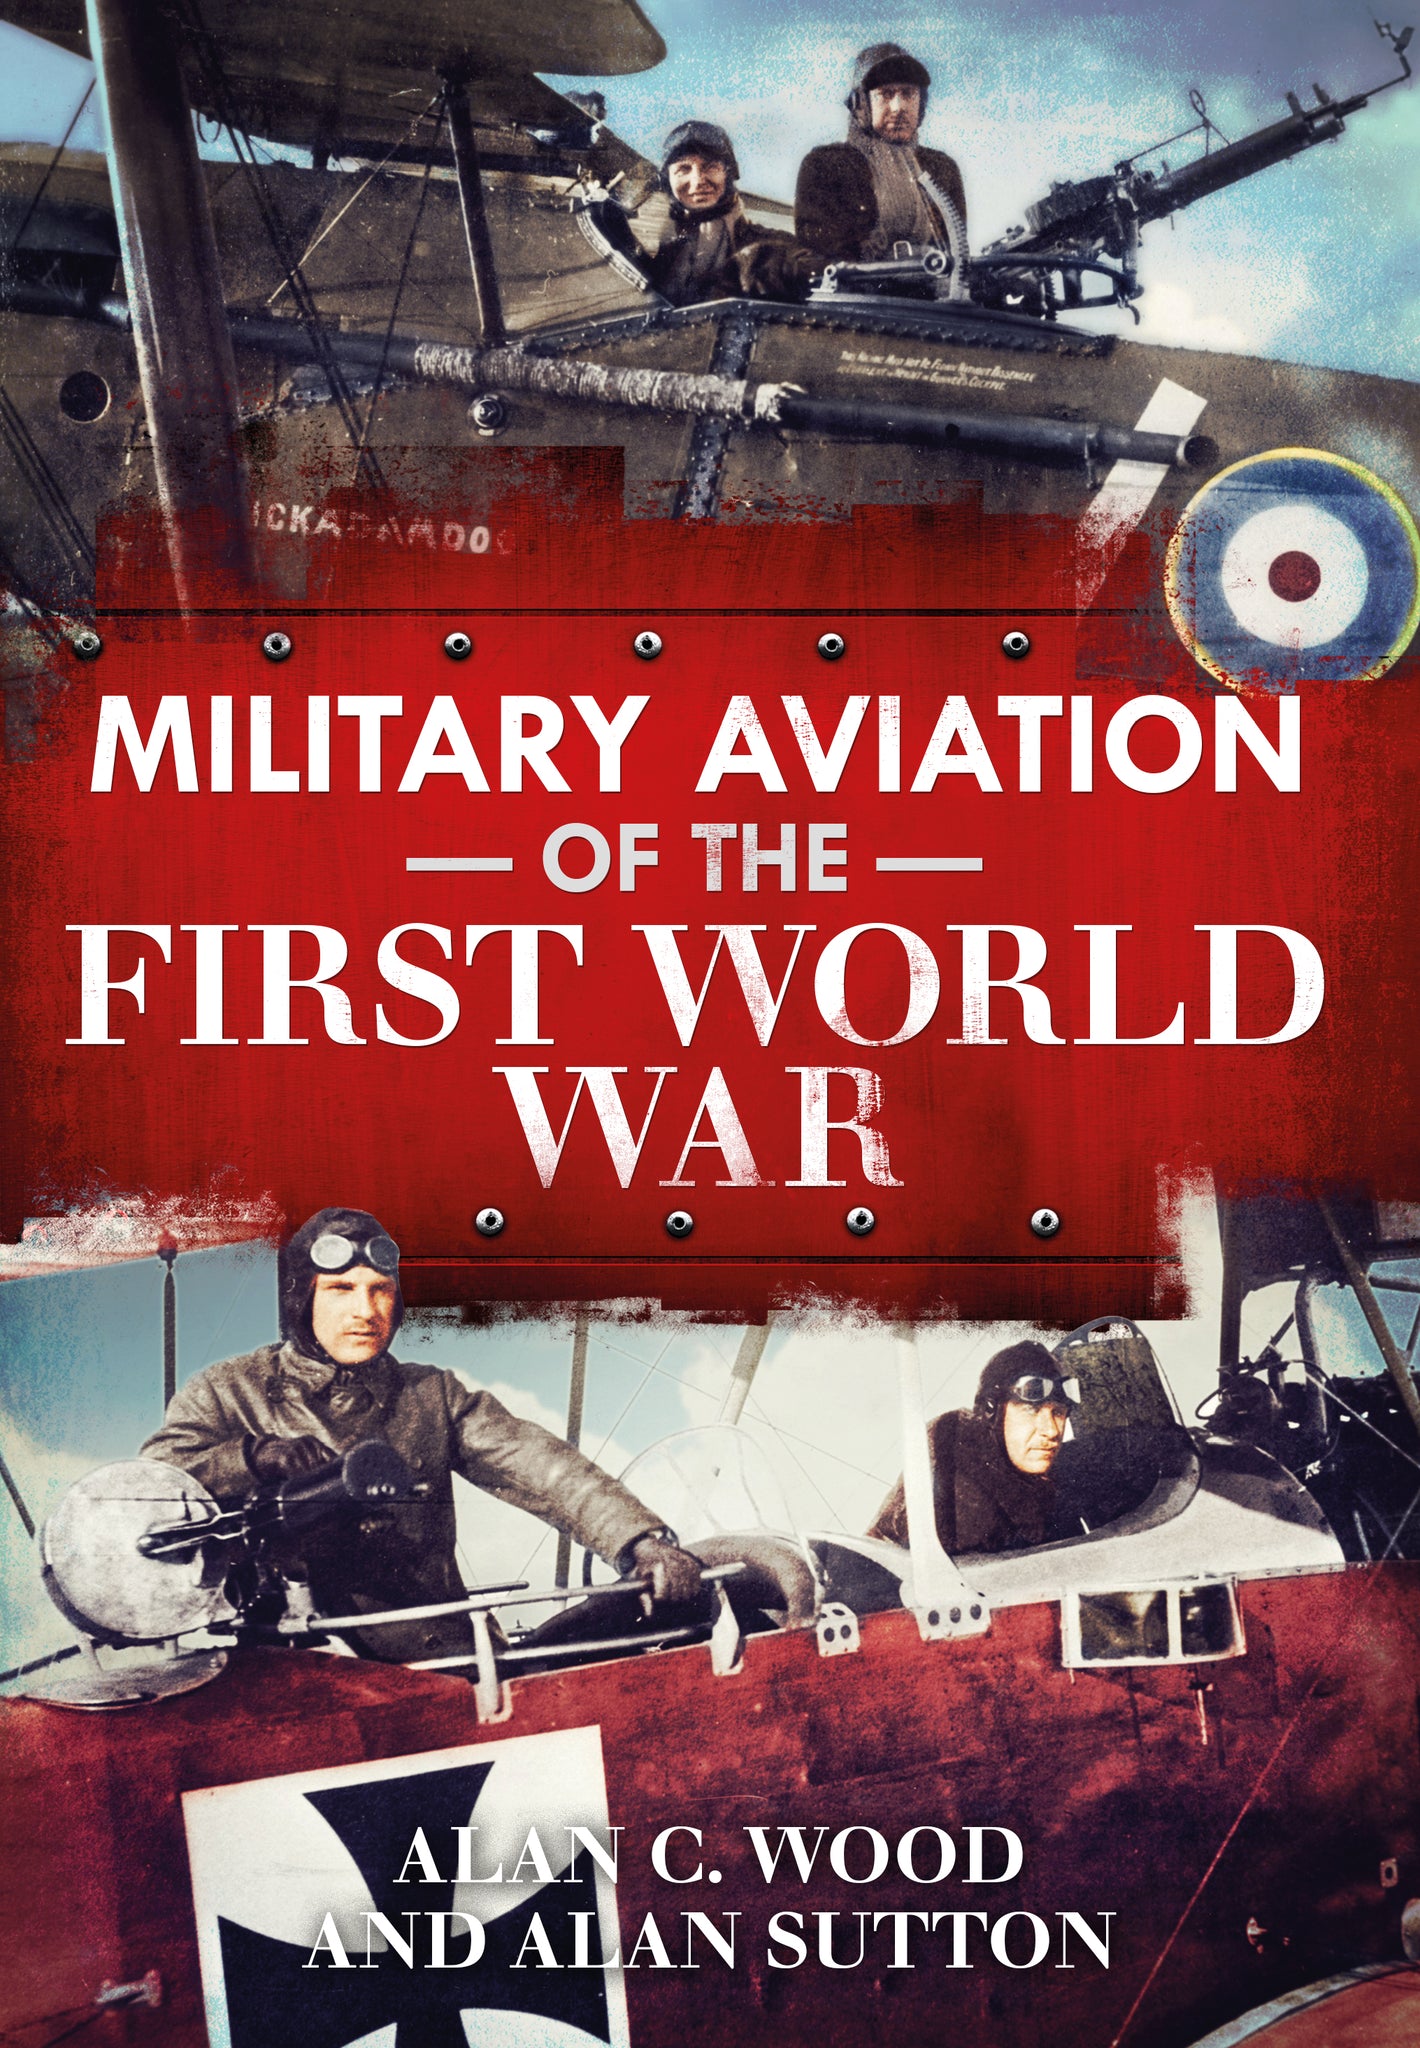 Military Aviation of the First World War (paperback edition)